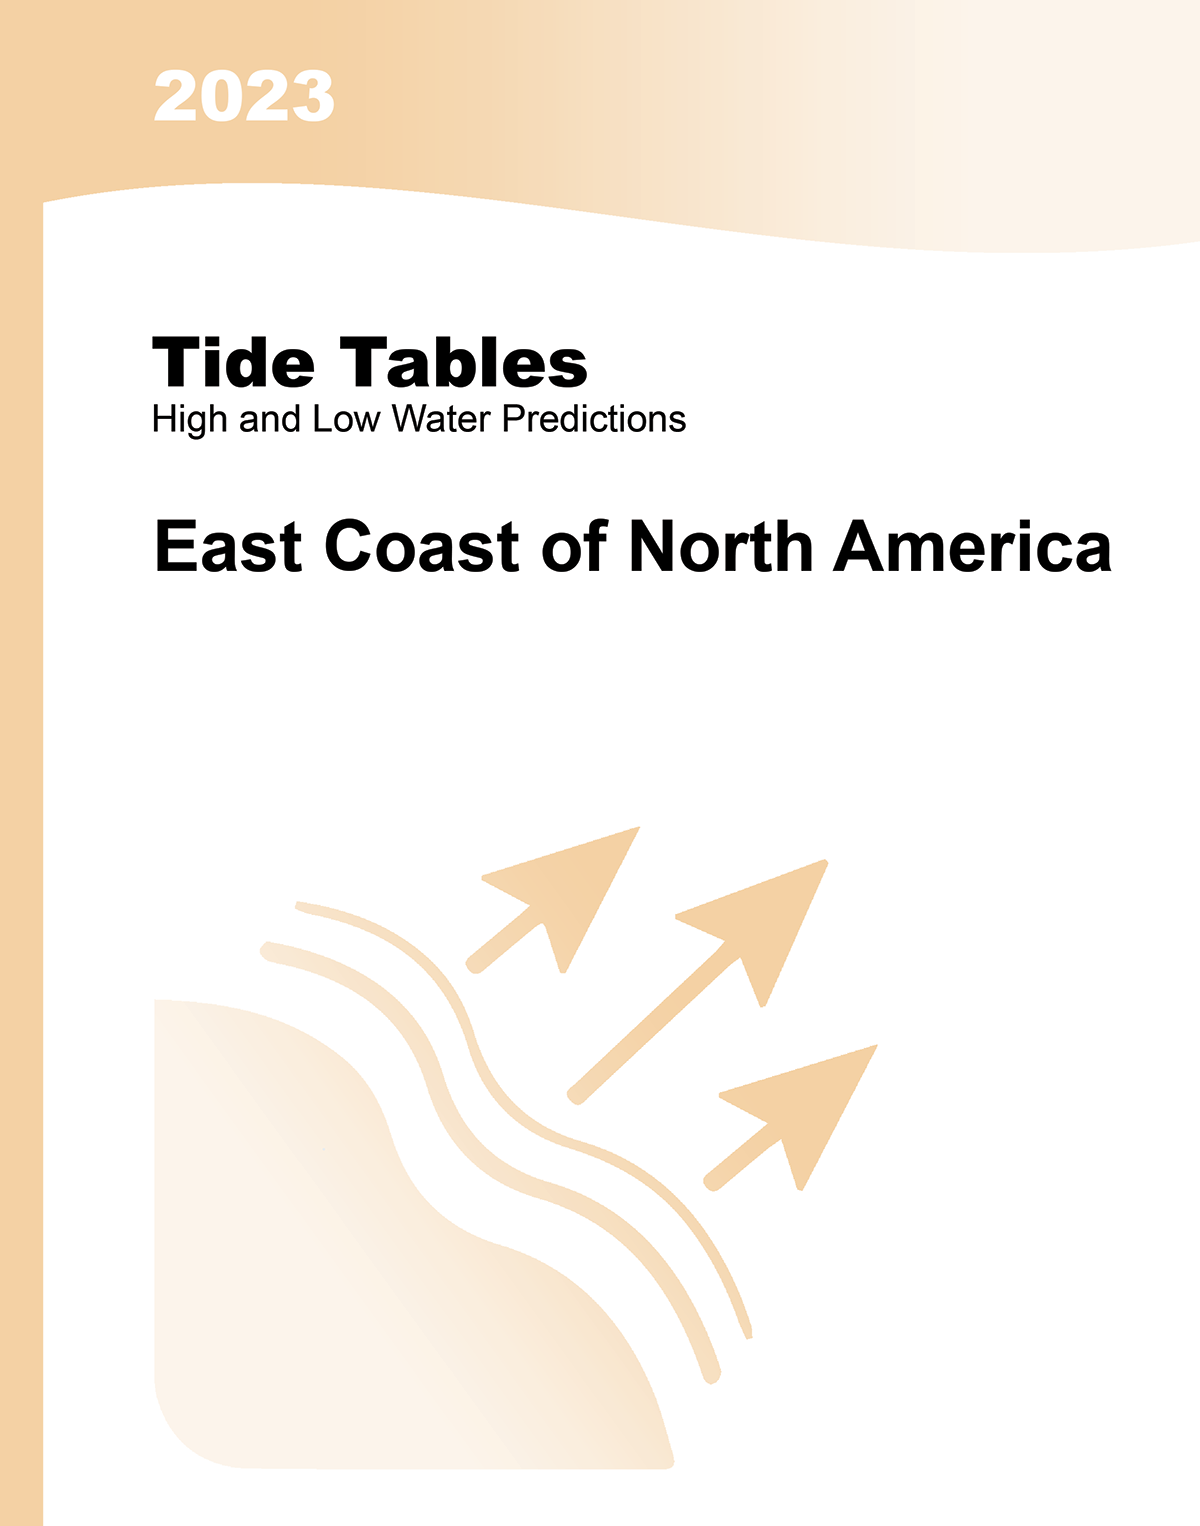 Tide and Tidal Current Tables, Tide Tables 2023: East Coast of North America - U.S. Waters